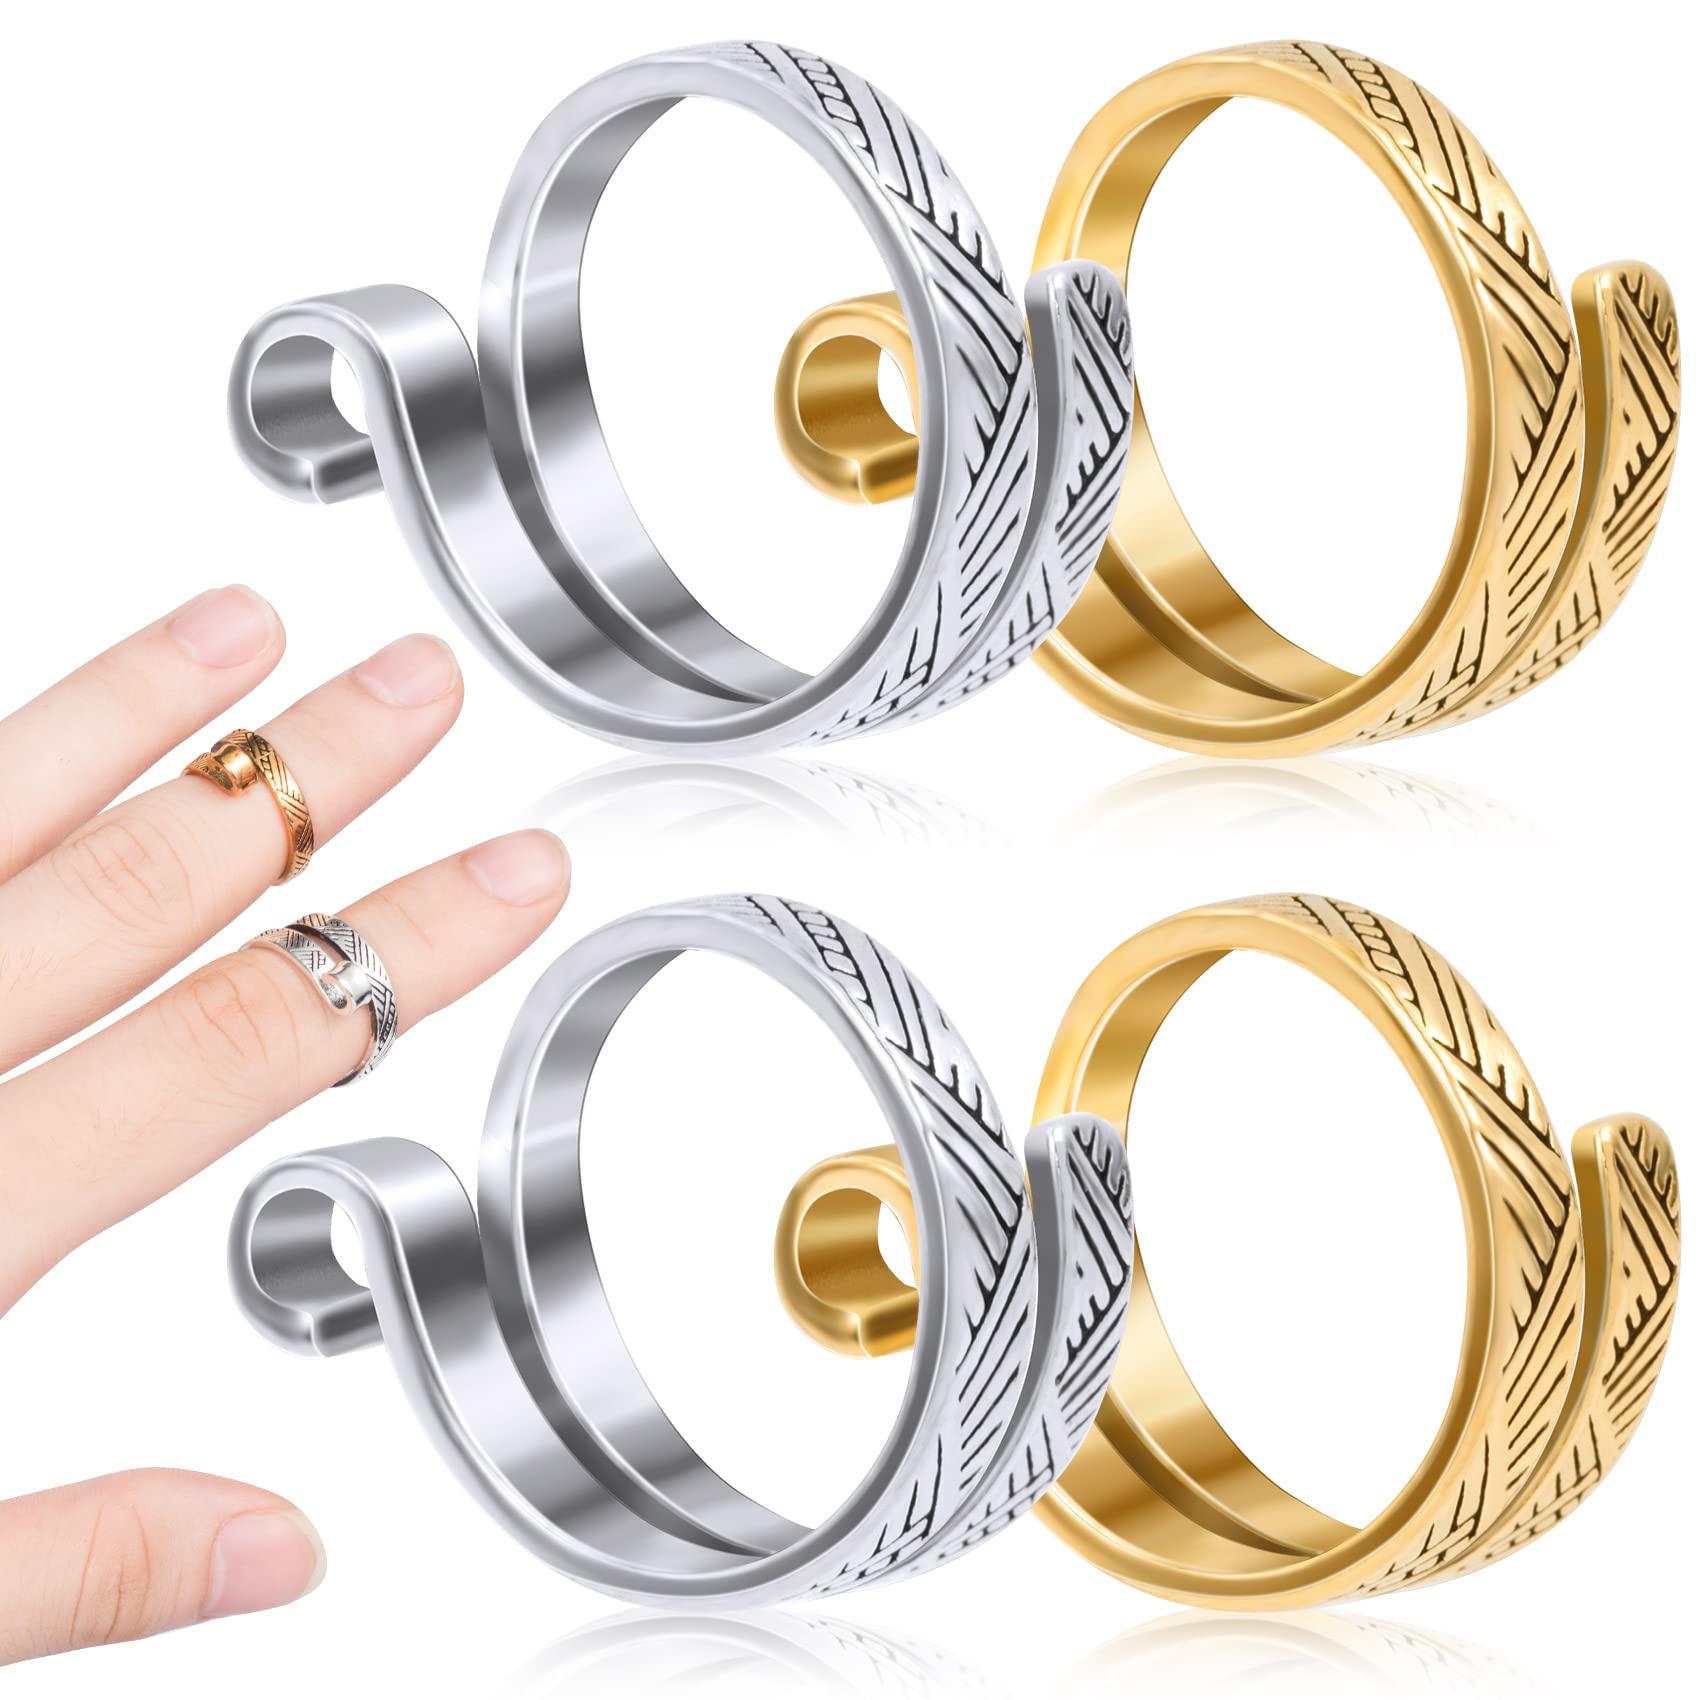 ANCIRS ancirs 4 pack knitting crochet loop ring for fingers, adjustable crochet  tension ring, metal open yarn guide finger holders